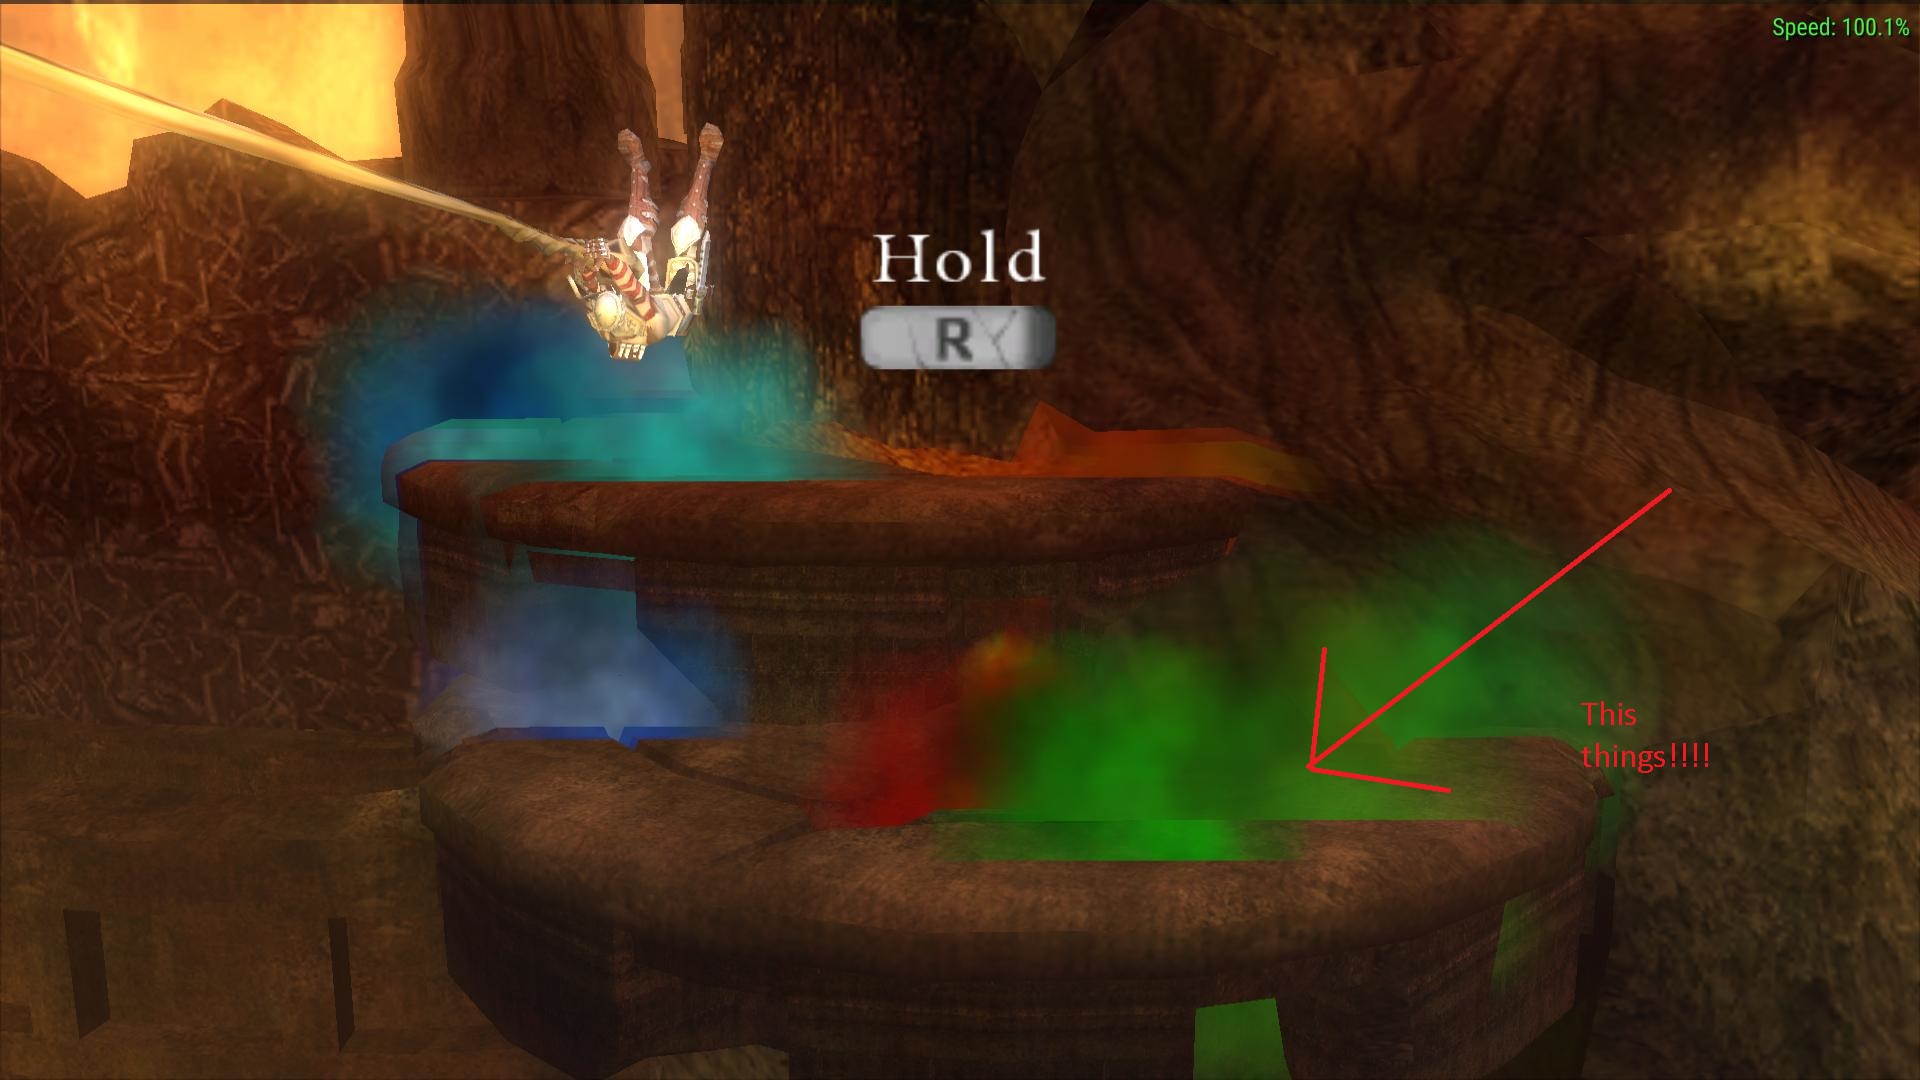 Dante's Inferno D3D11 Text Issue · Issue #13786 · hrydgard/ppsspp